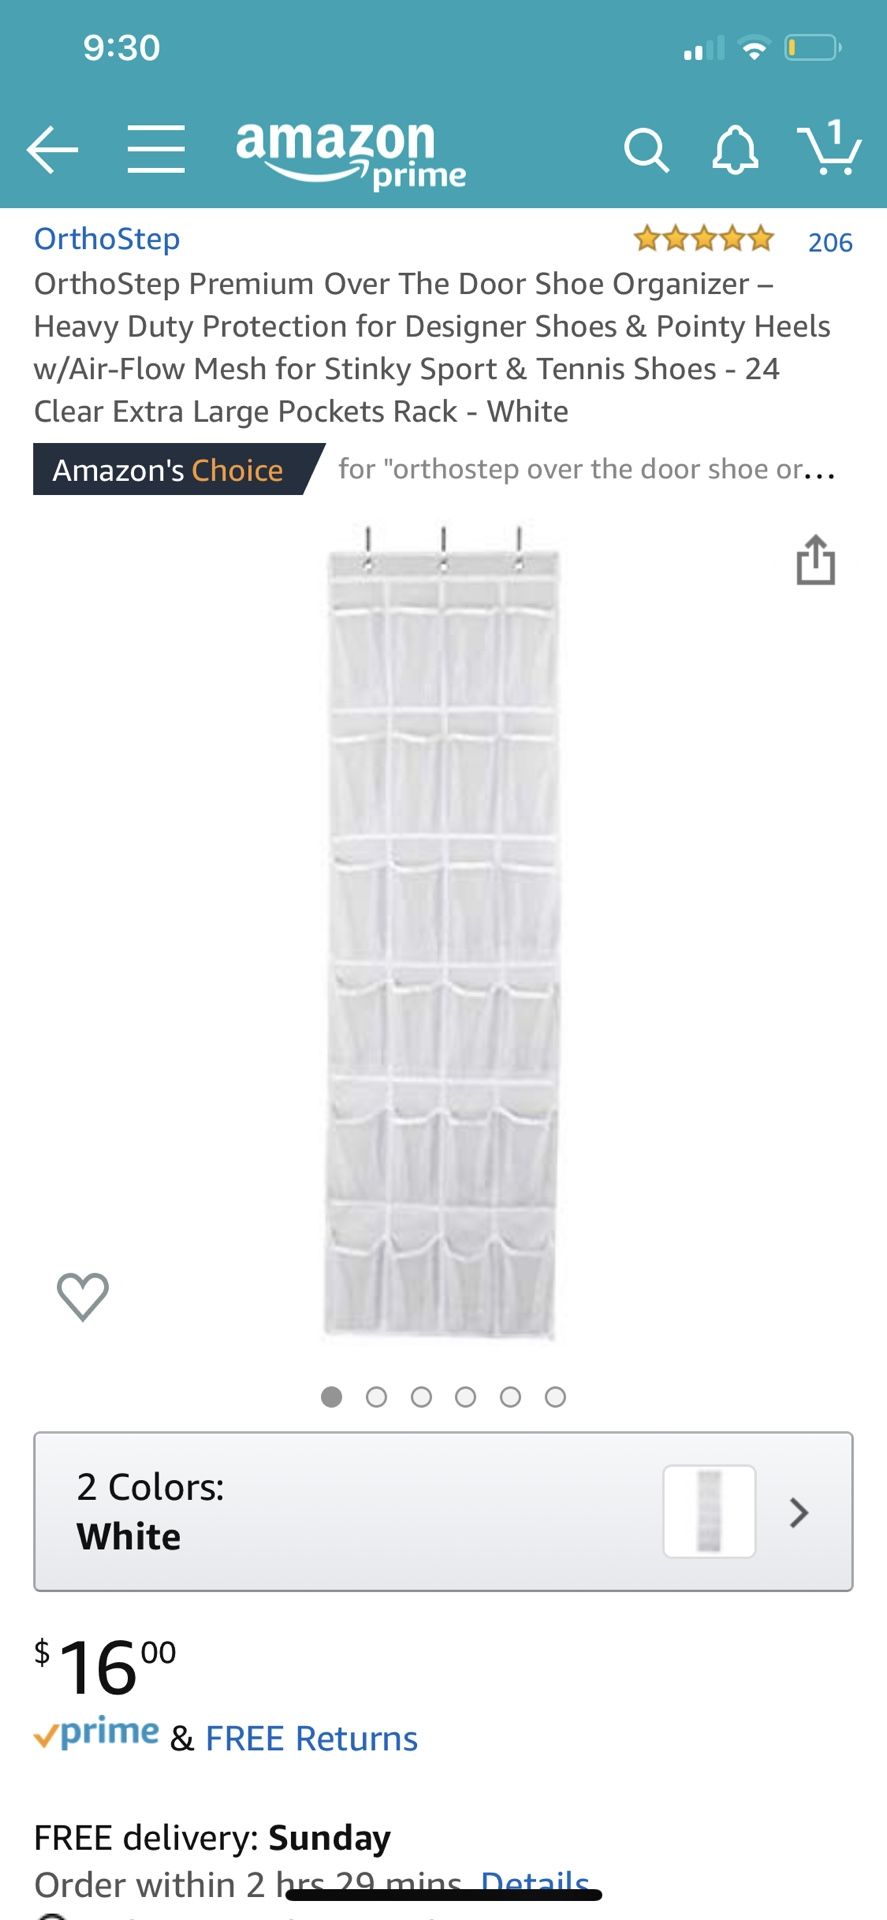 Over The Door Shoe Organizer – Heavy Duty Protection for Shoes & Items w Air-Flow Mesh 24 pockets